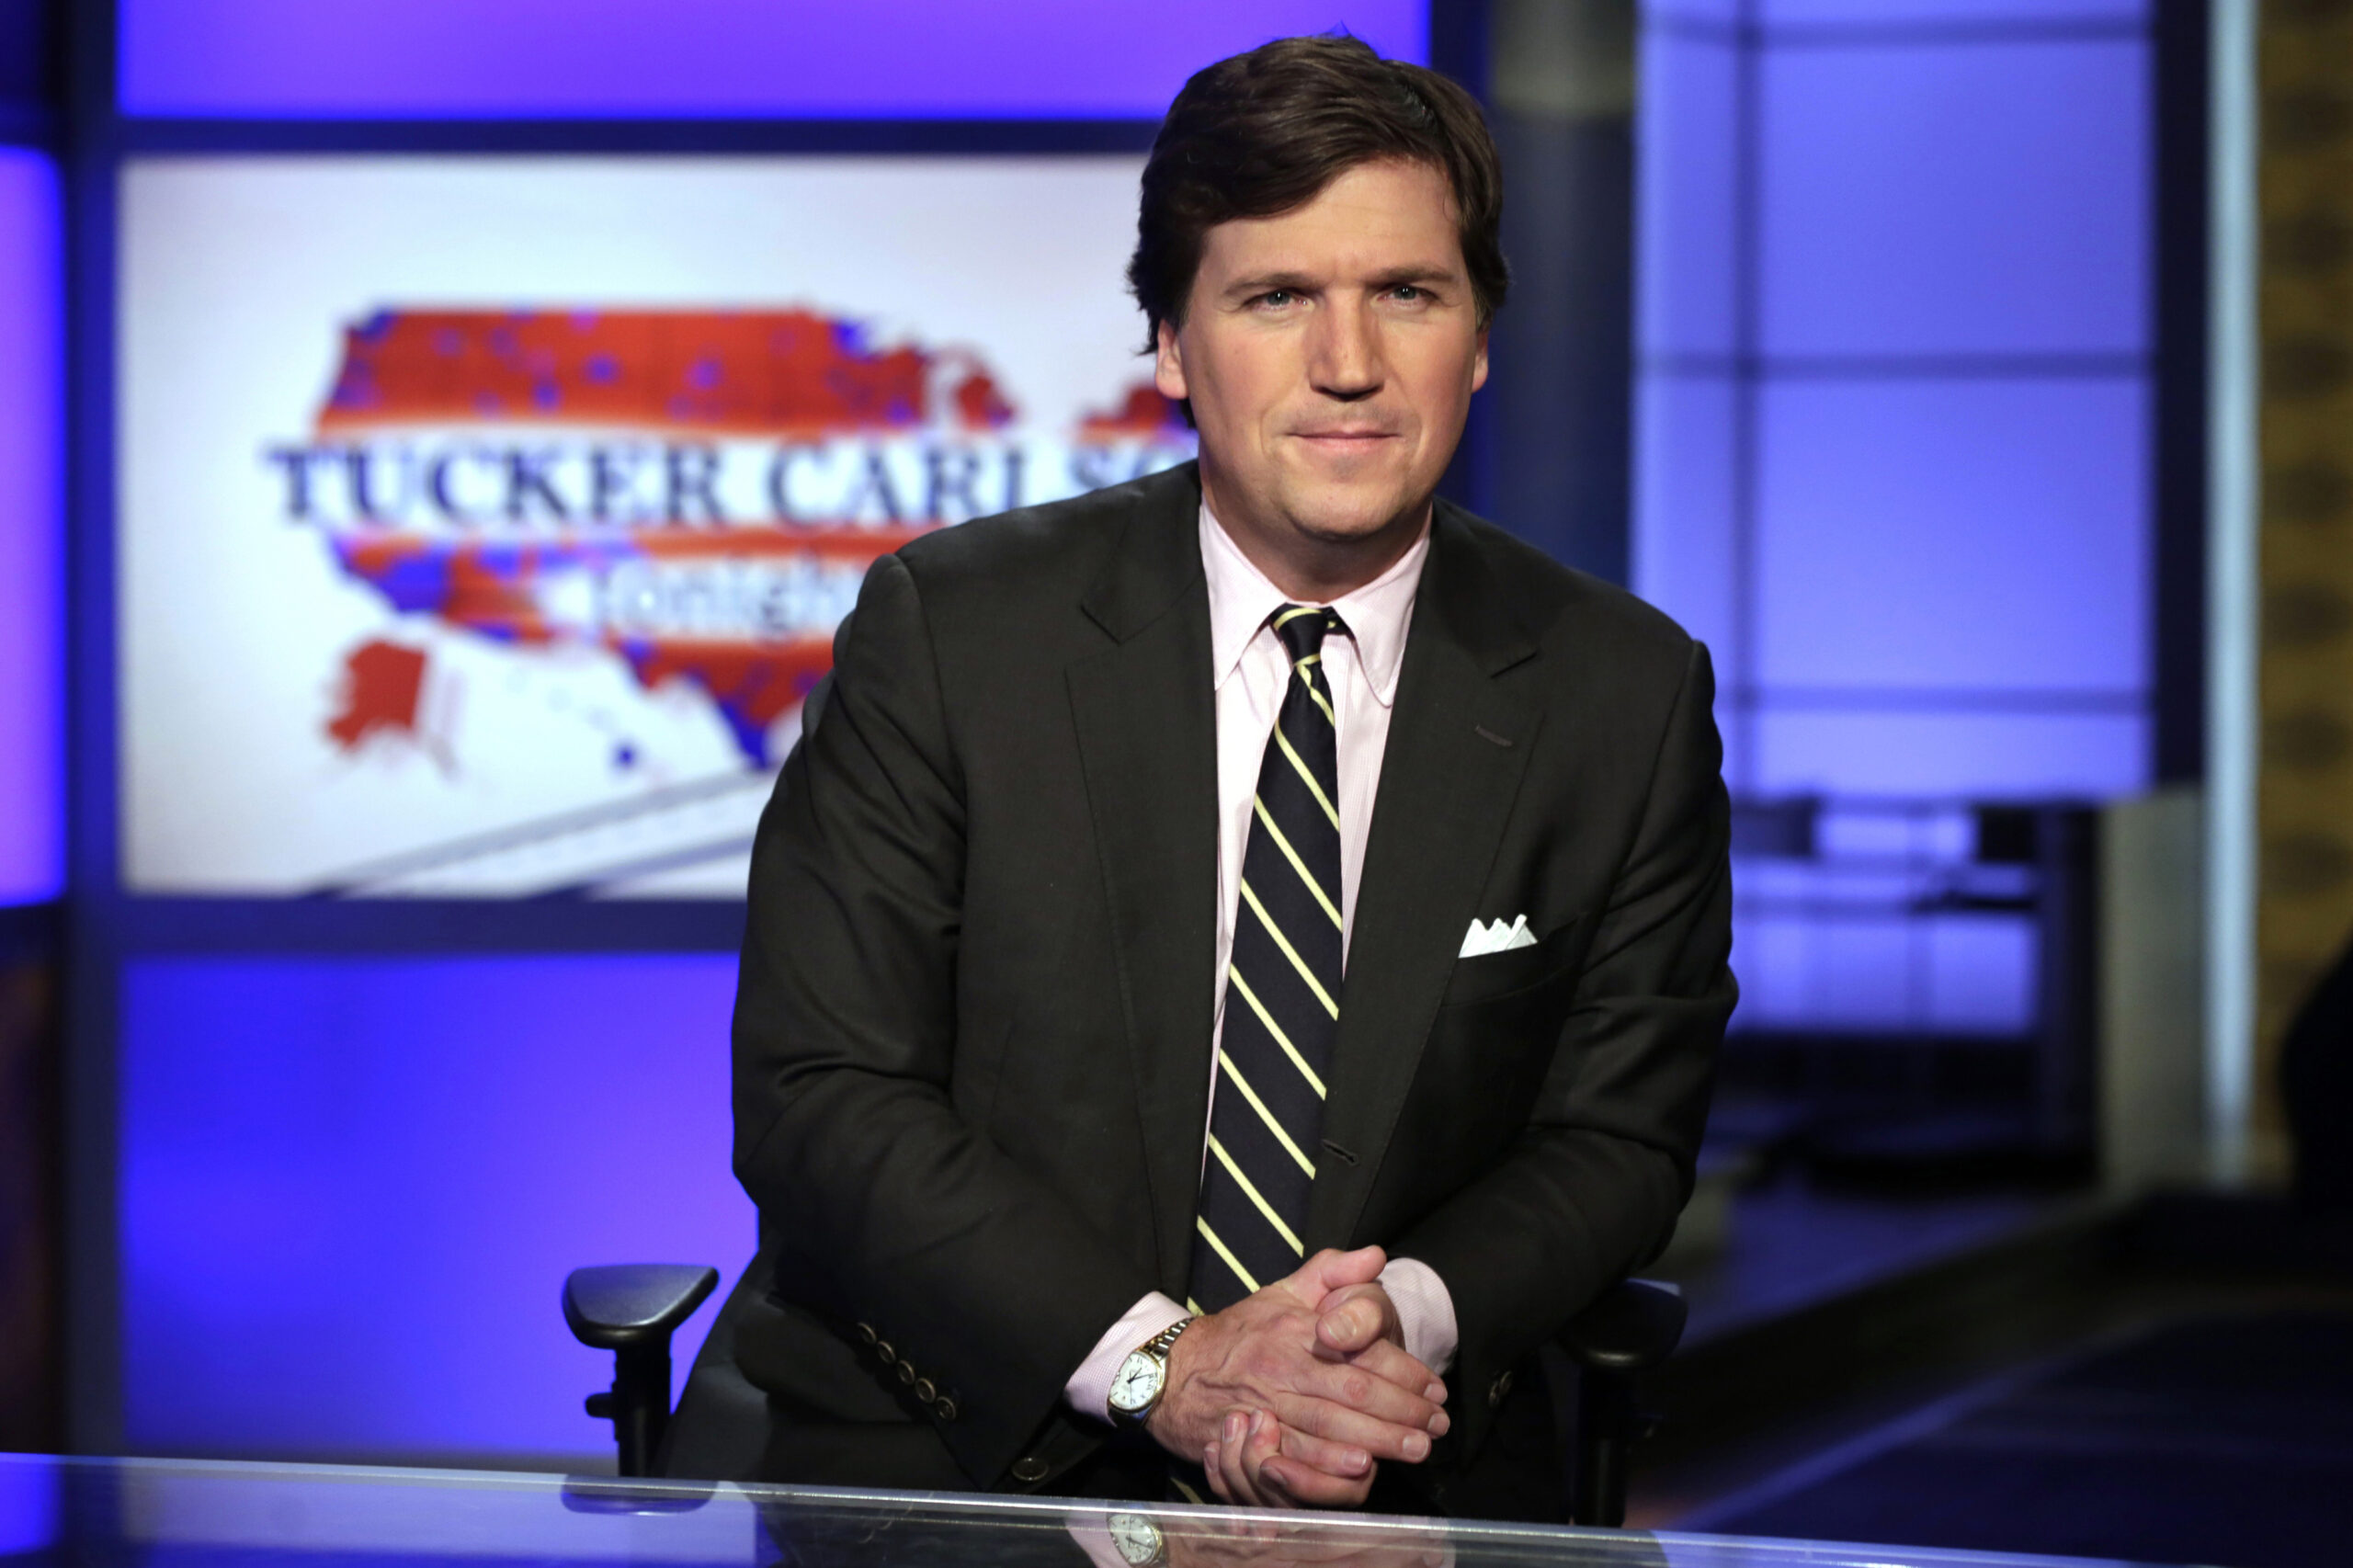 Tucker Carlson, Jeanine Pirro, Sean Hannity and Others Set To Testify at Fox Defamation Trial (mediaite.com)